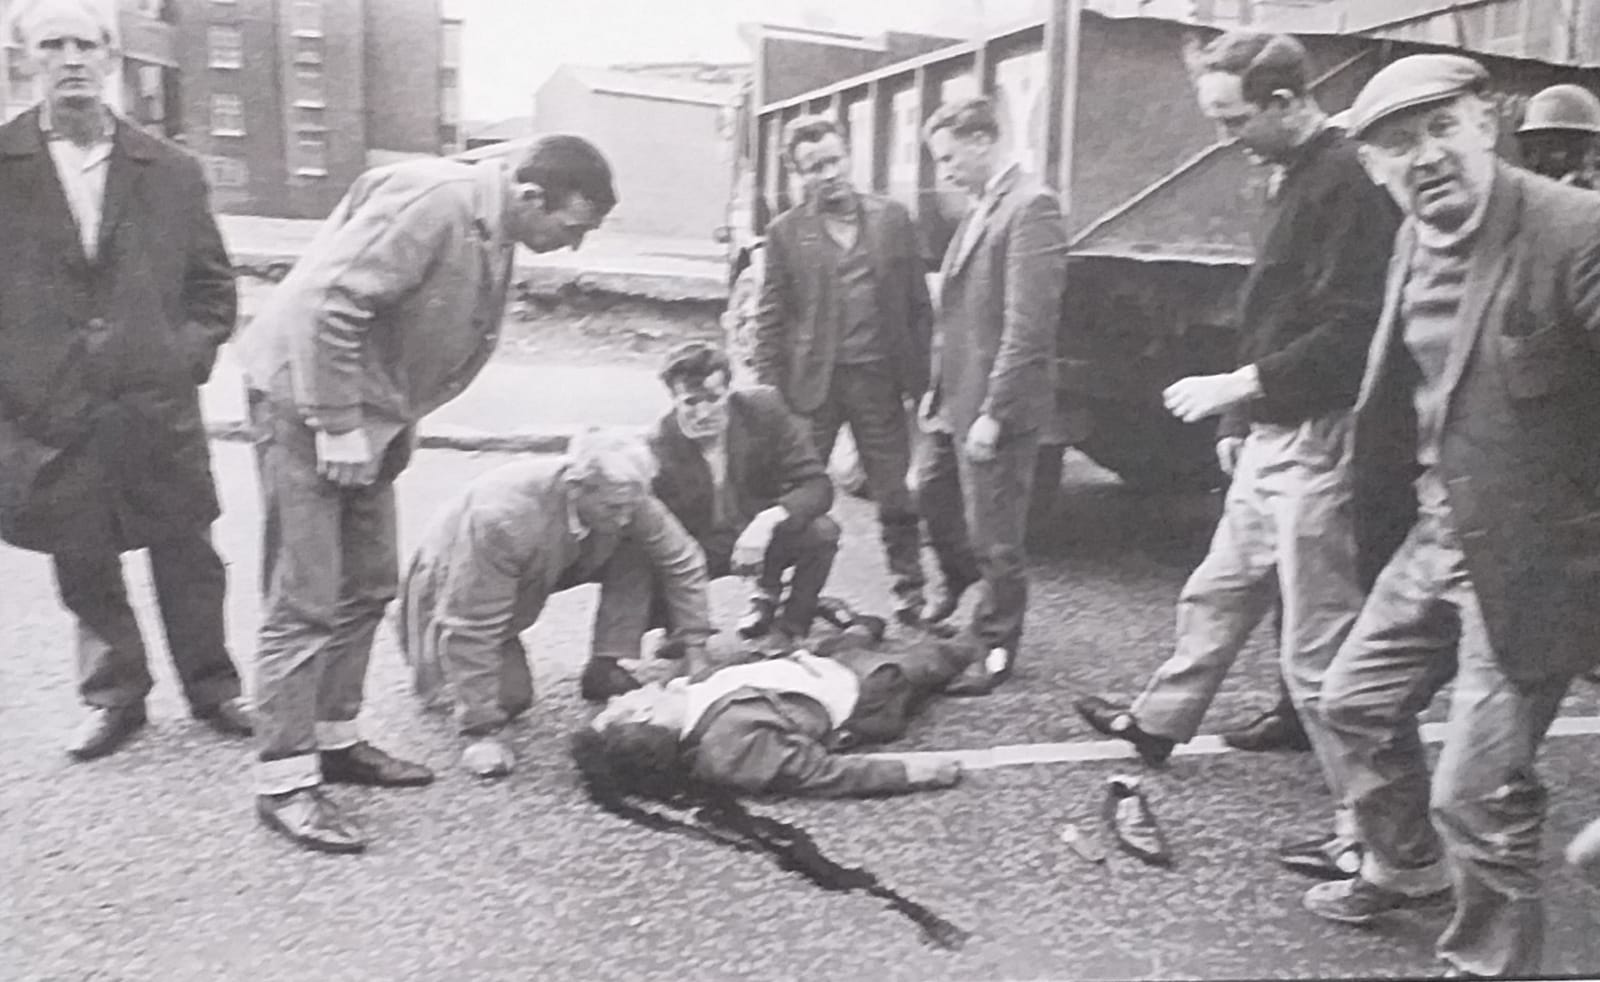 CURFEW VICTIM: Charles O\'Neill lies dying after being run over by a British Army vehicle during the Falls Curfew of 1970.